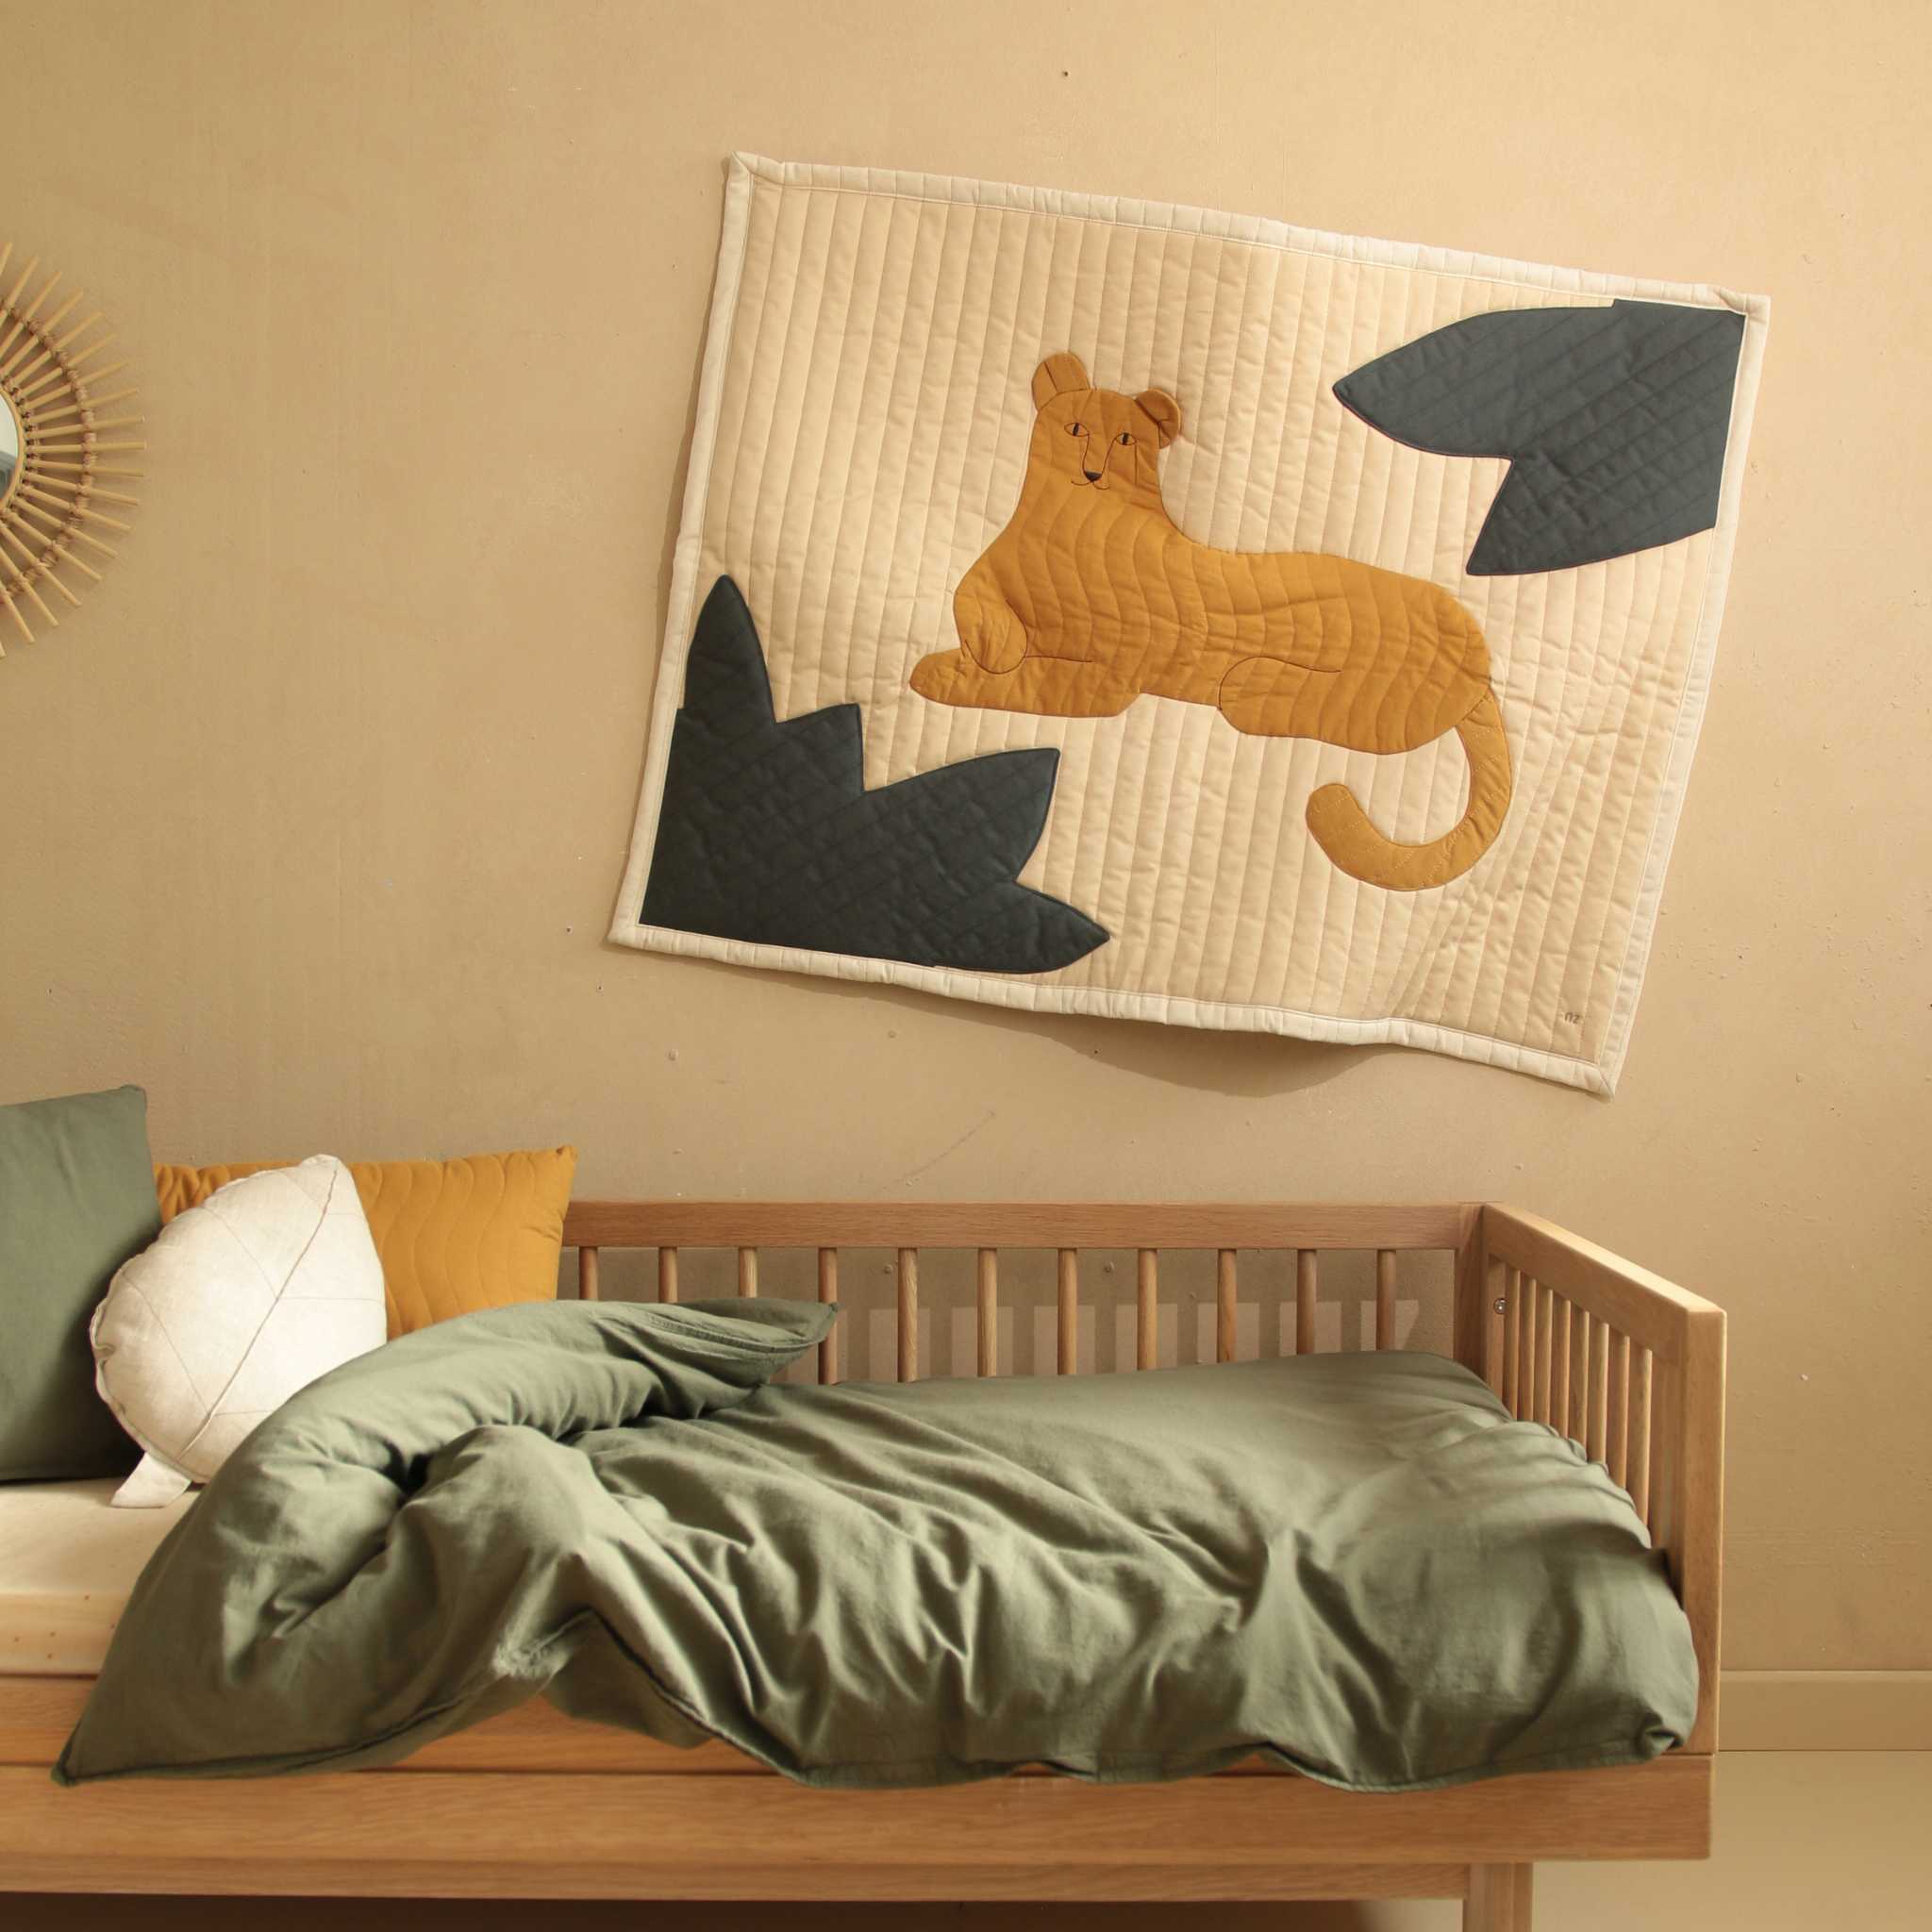 Nododinoz Leopard Quilted Blanket On Wall Above Bed